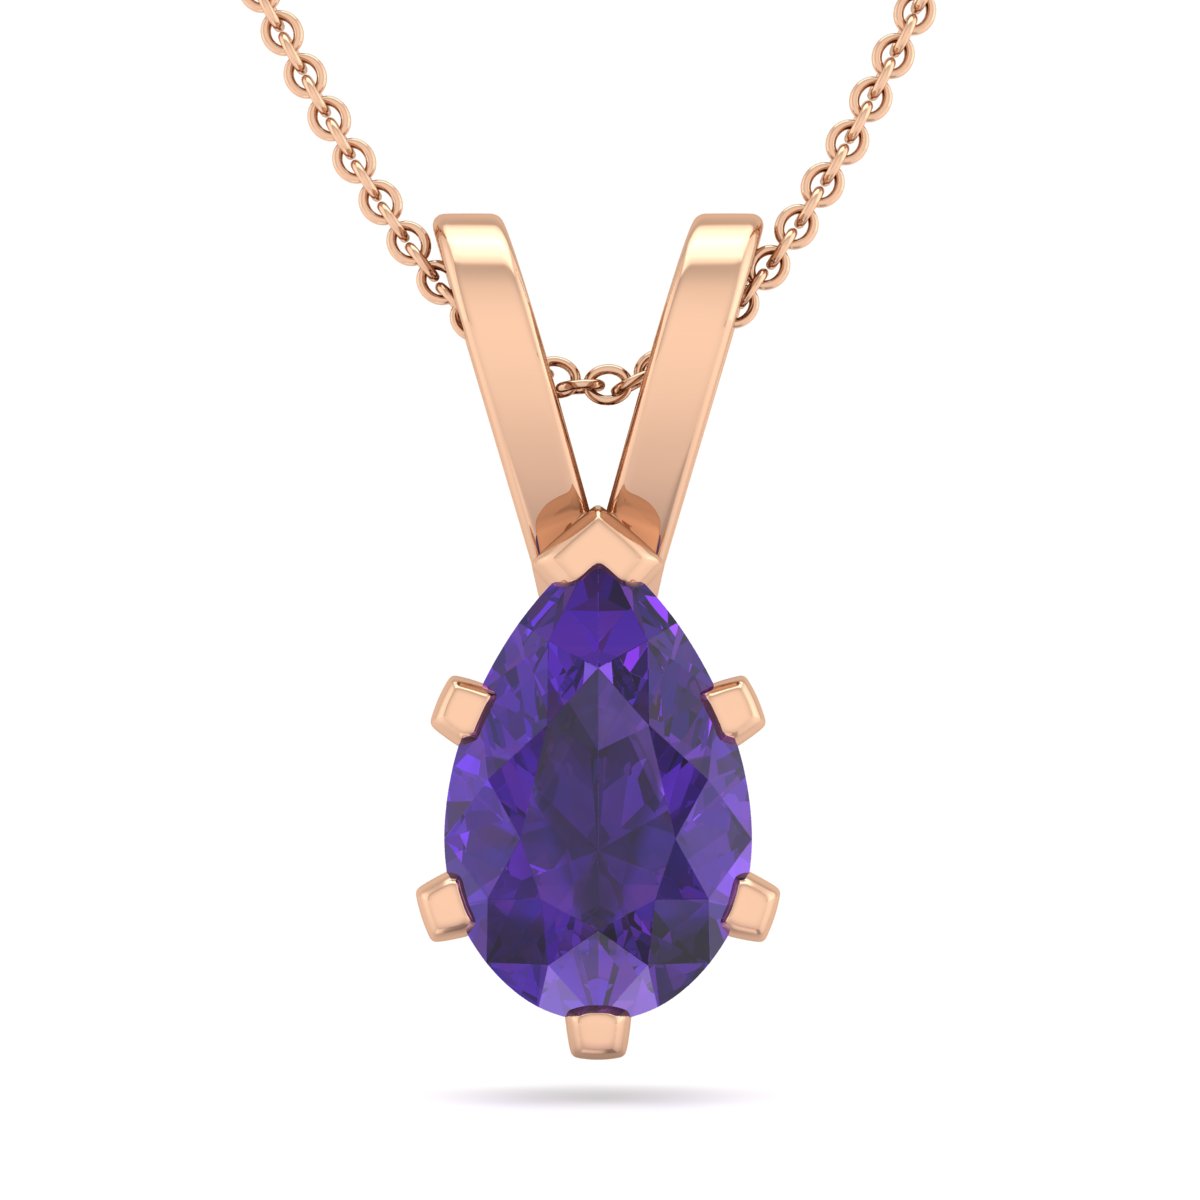 Sselects 3/4 Carat Pear Shape Amethyst Necklace In 14k Rose Gold Over Sterling In Silver